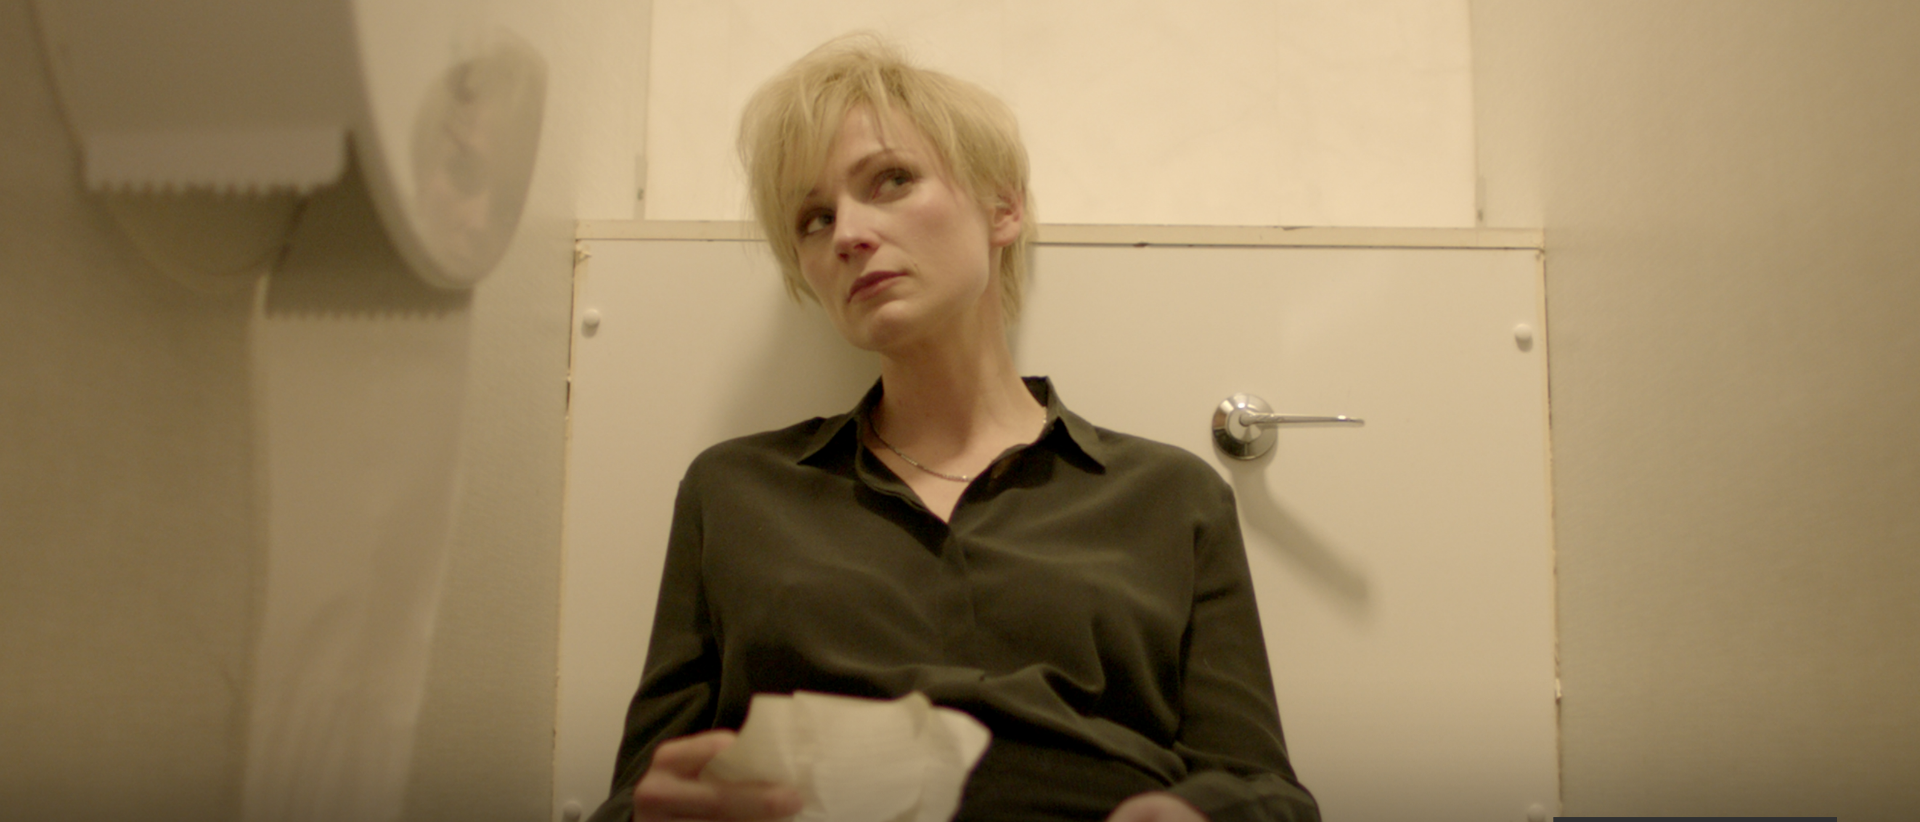 a still from burial featuring a person sitting in a tolet cubicle holding some papers